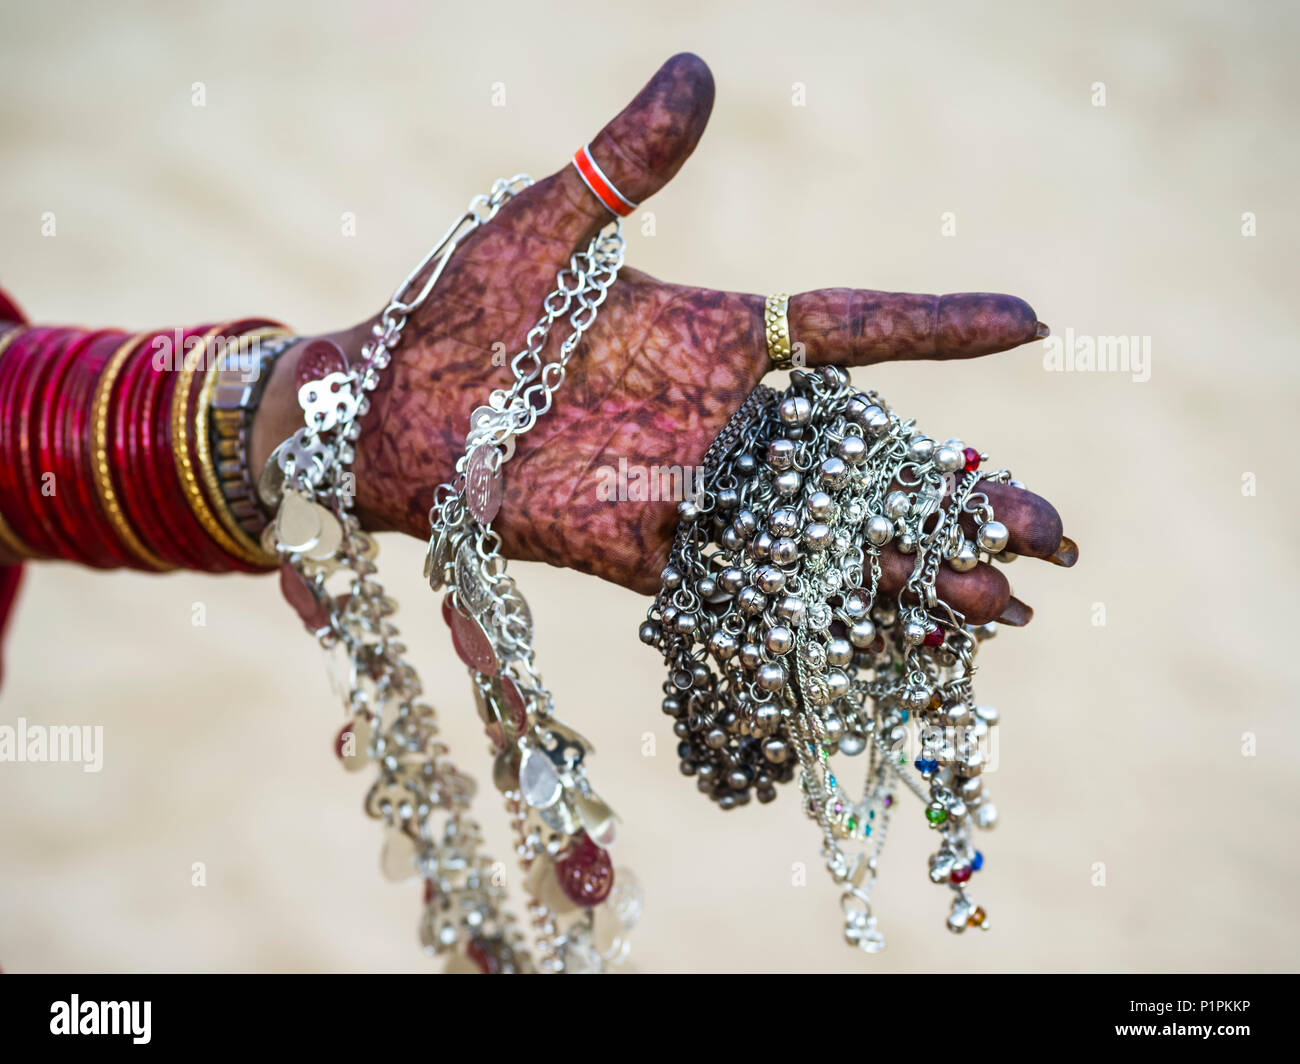 A woman's hand covered in henna body art and holding silver jewelry; Jaisalmer, Rajasthan, India Stock Photo